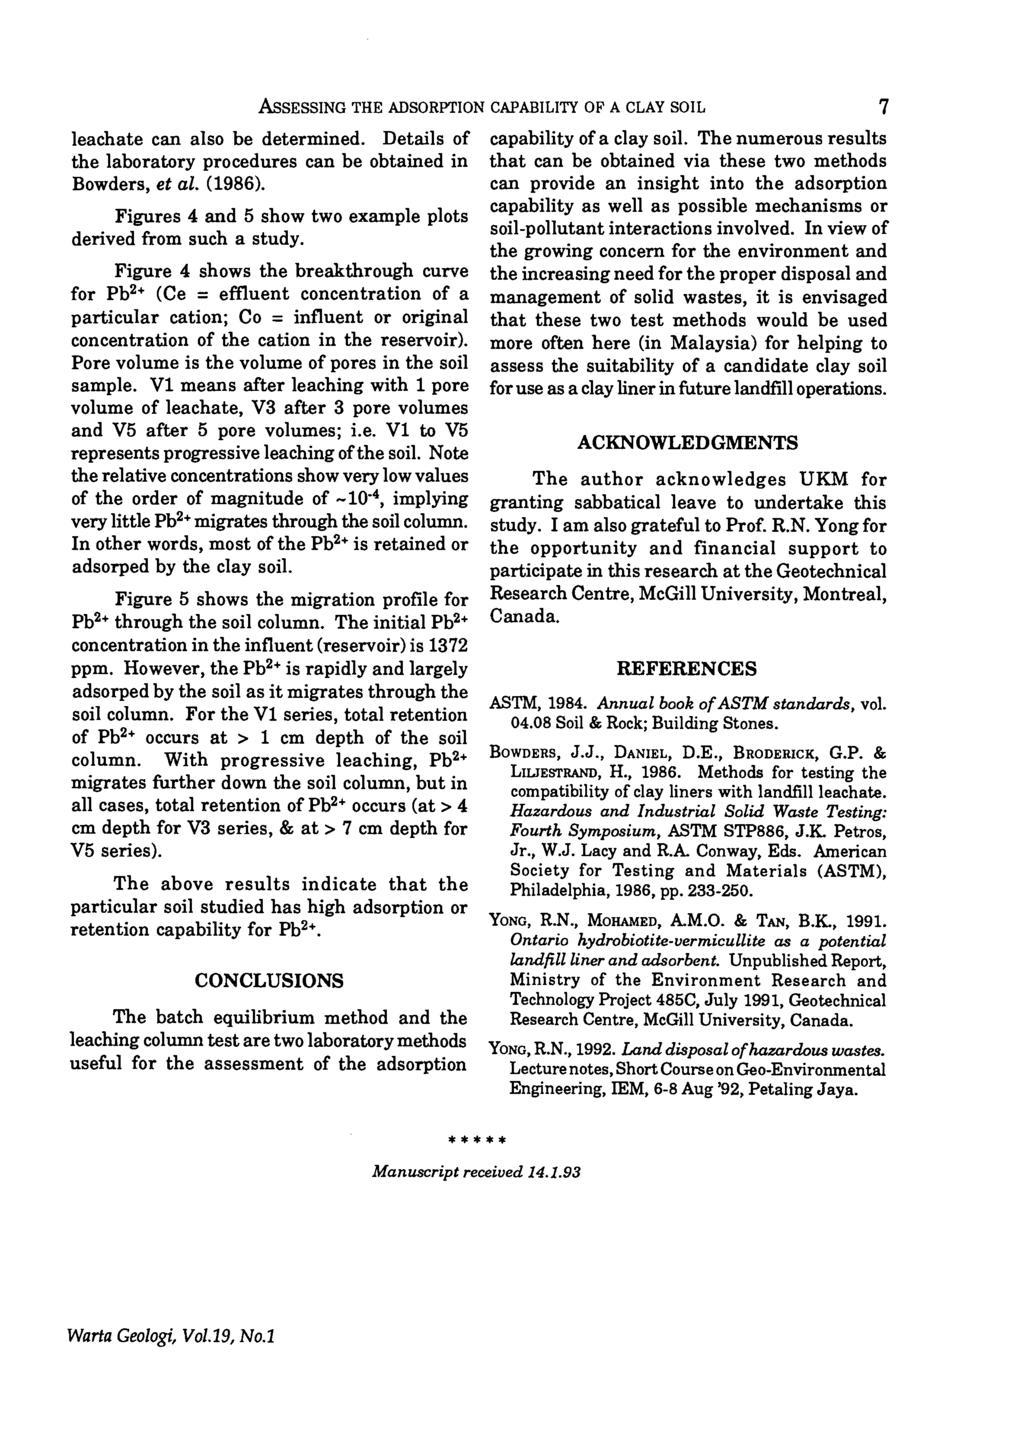 AsSESSING THE ADSORPTION CAPABILITY OF A CLAY SOIL 7 leachate can also be determined. Details of the laboratory procedures can be obtained in Bowders, et al. (1986).